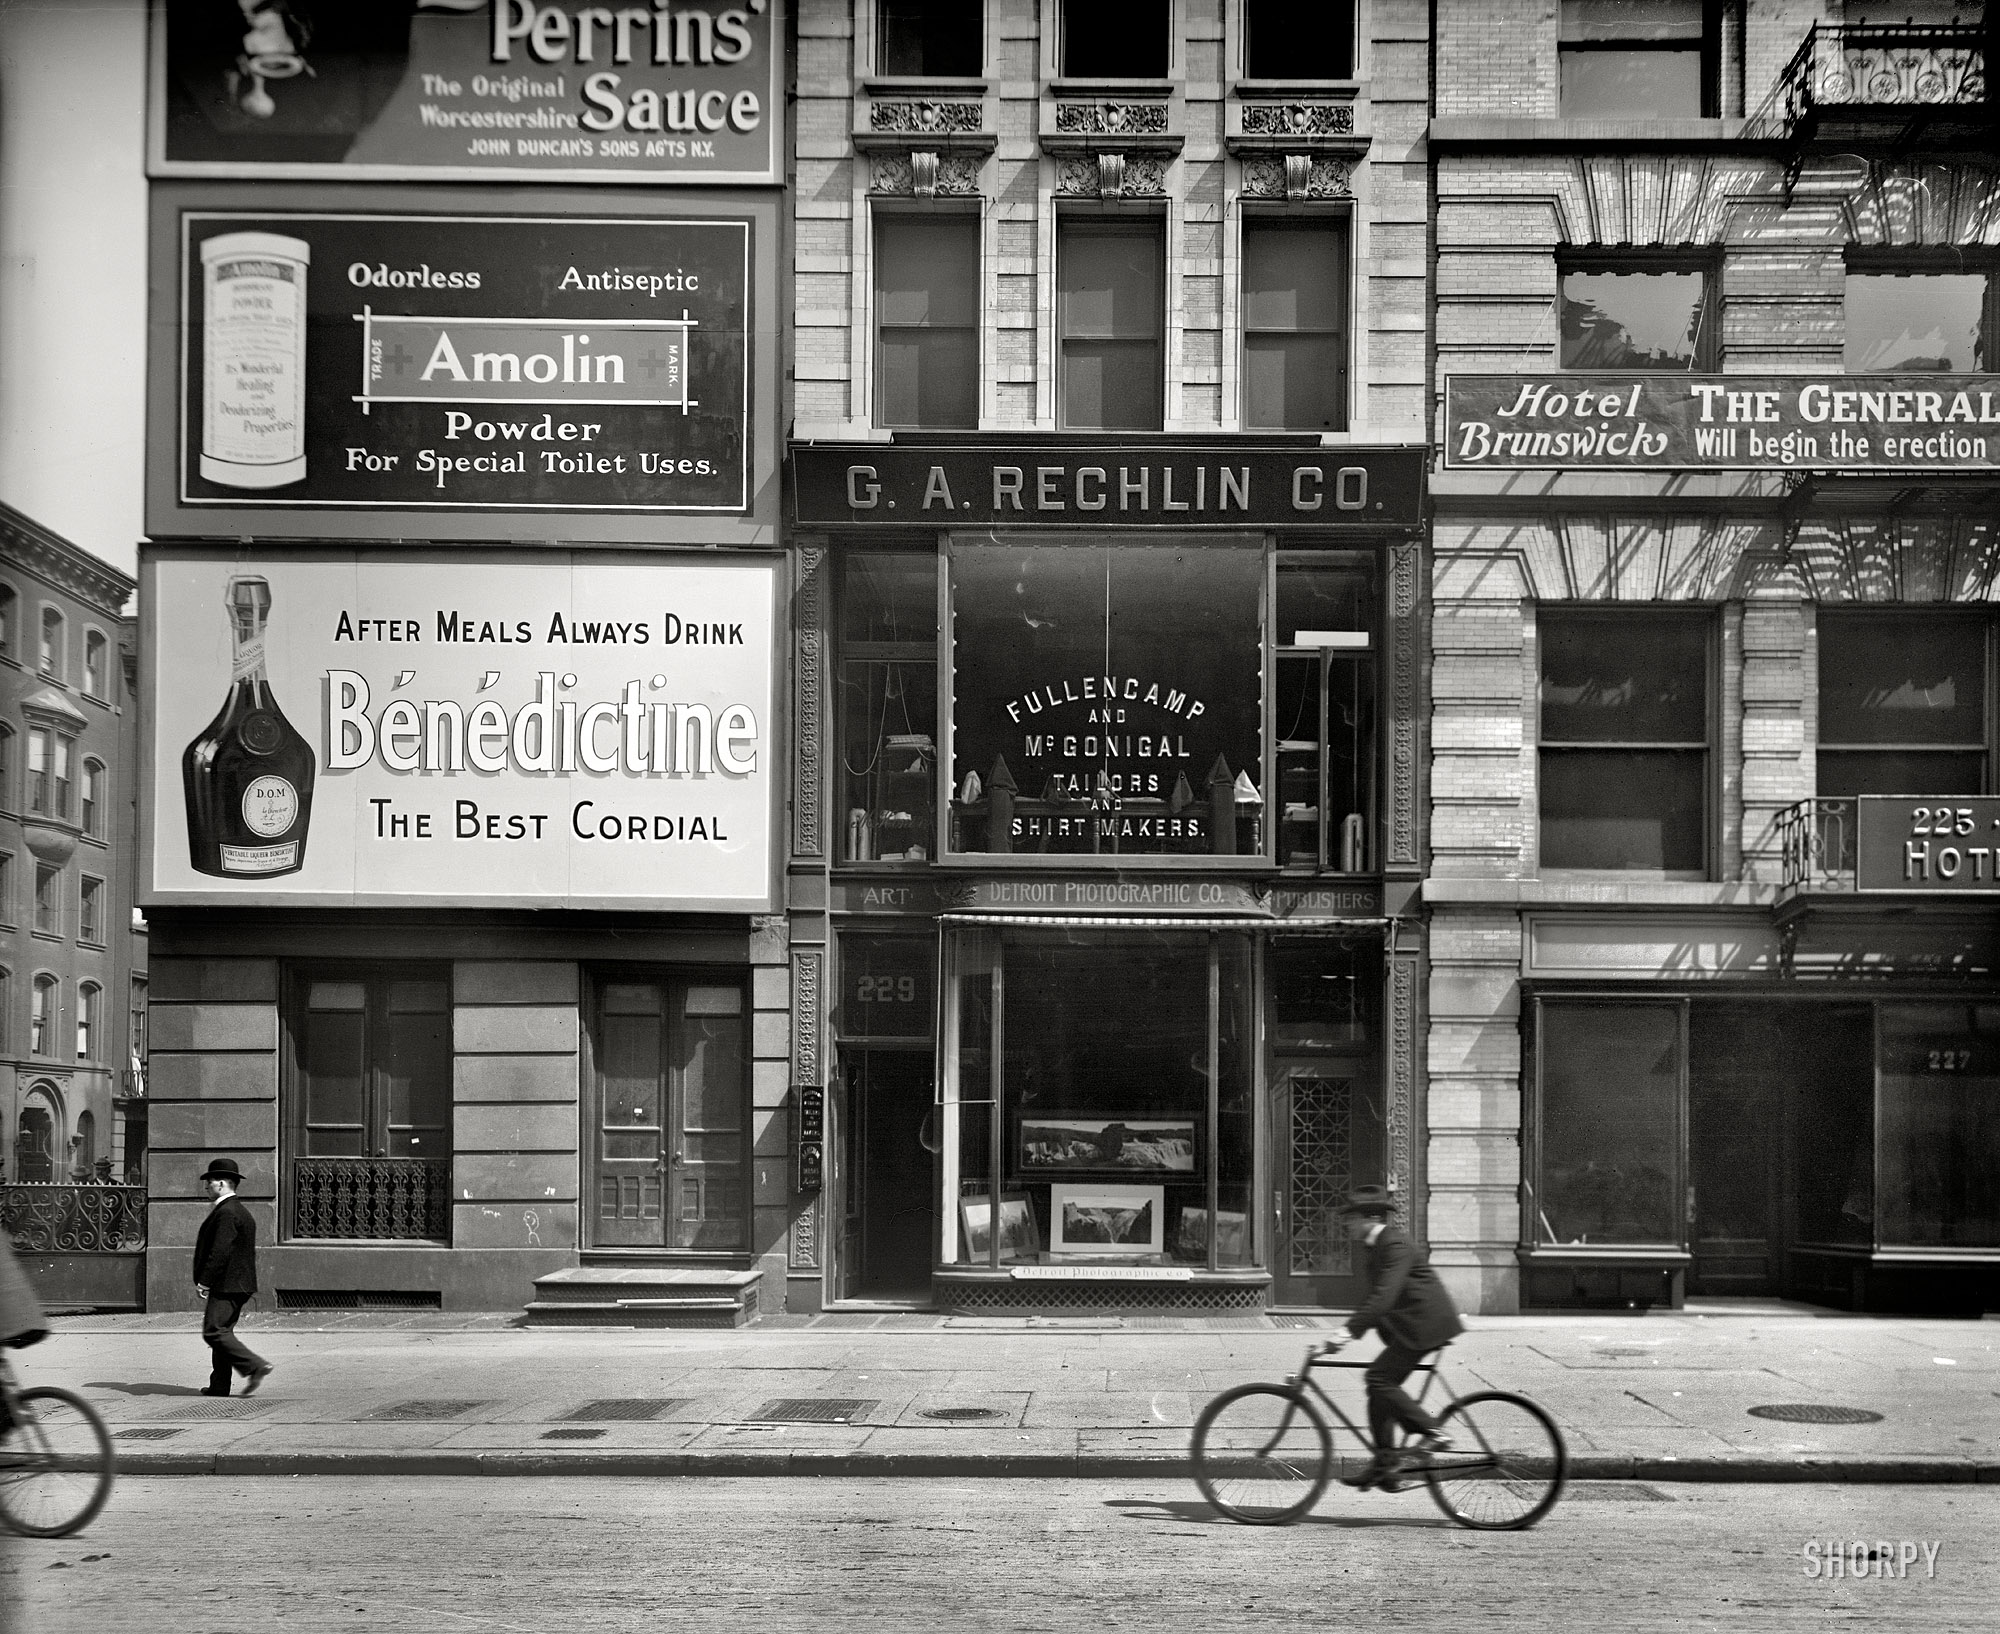 New York circa 1903. "Detroit Photographic Co., 229 Fifth Avenue." Another of Detroit Photo's Manhattan stores. 8x10 inch glass negative. View full size.